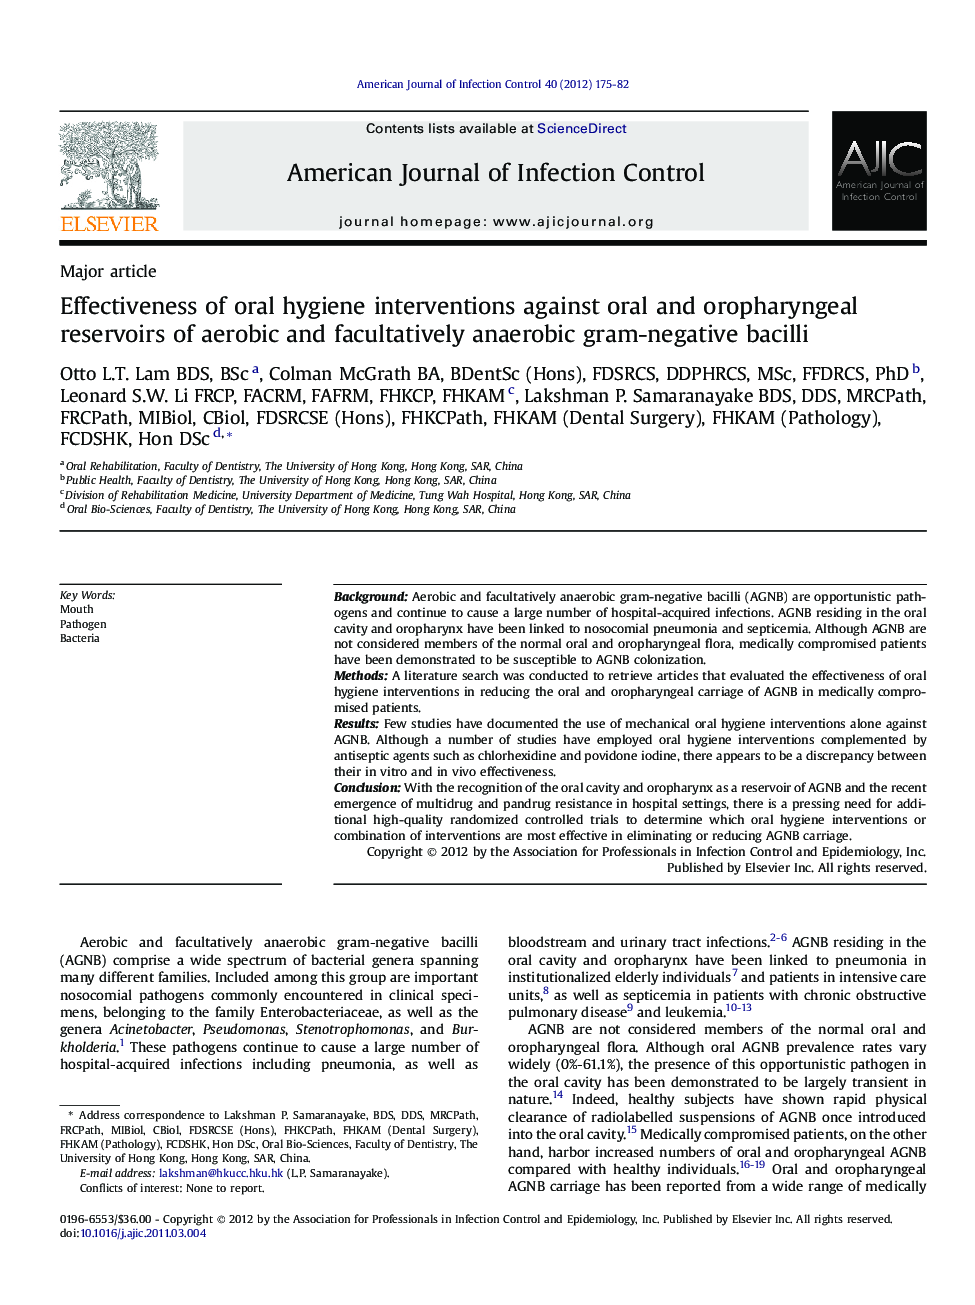 Effectiveness of oral hygiene interventions against oral and oropharyngeal reservoirs of aerobic and facultatively anaerobic gram-negative bacilli 